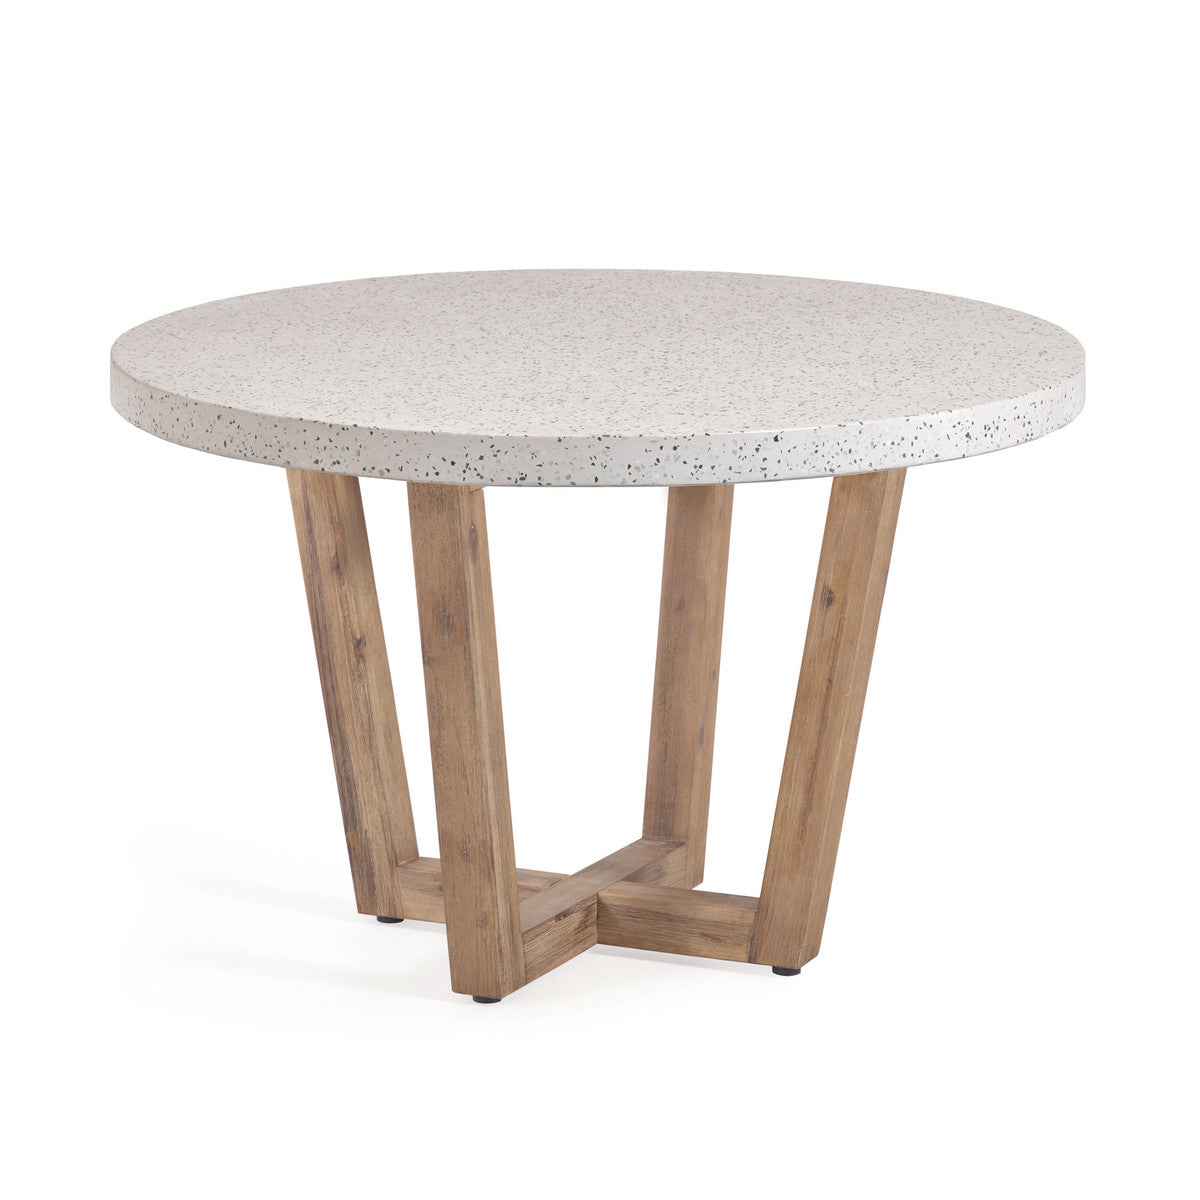 Outdoor Terrazzo Dining Table - White